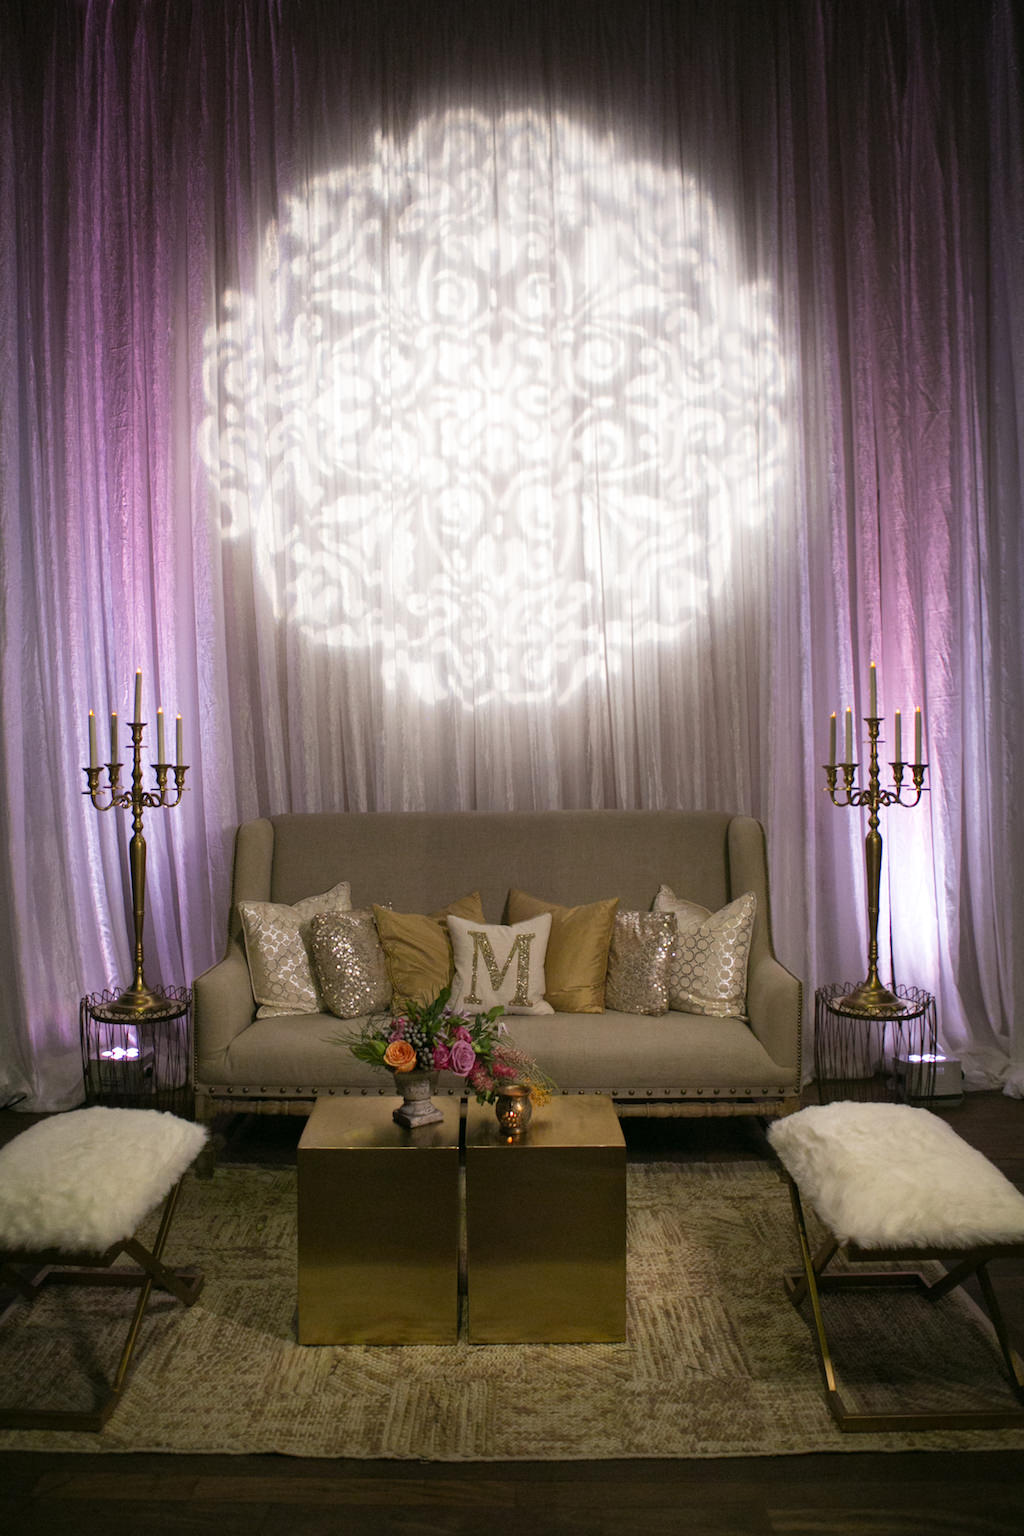 Stylish Wedding Lounge Decor with Modern Furnishings, Tropical Florals, and Purple Uplighting | St. Petersburg Wedding Venue NOVA 535 | Planner UNIQUE Weddings and Events